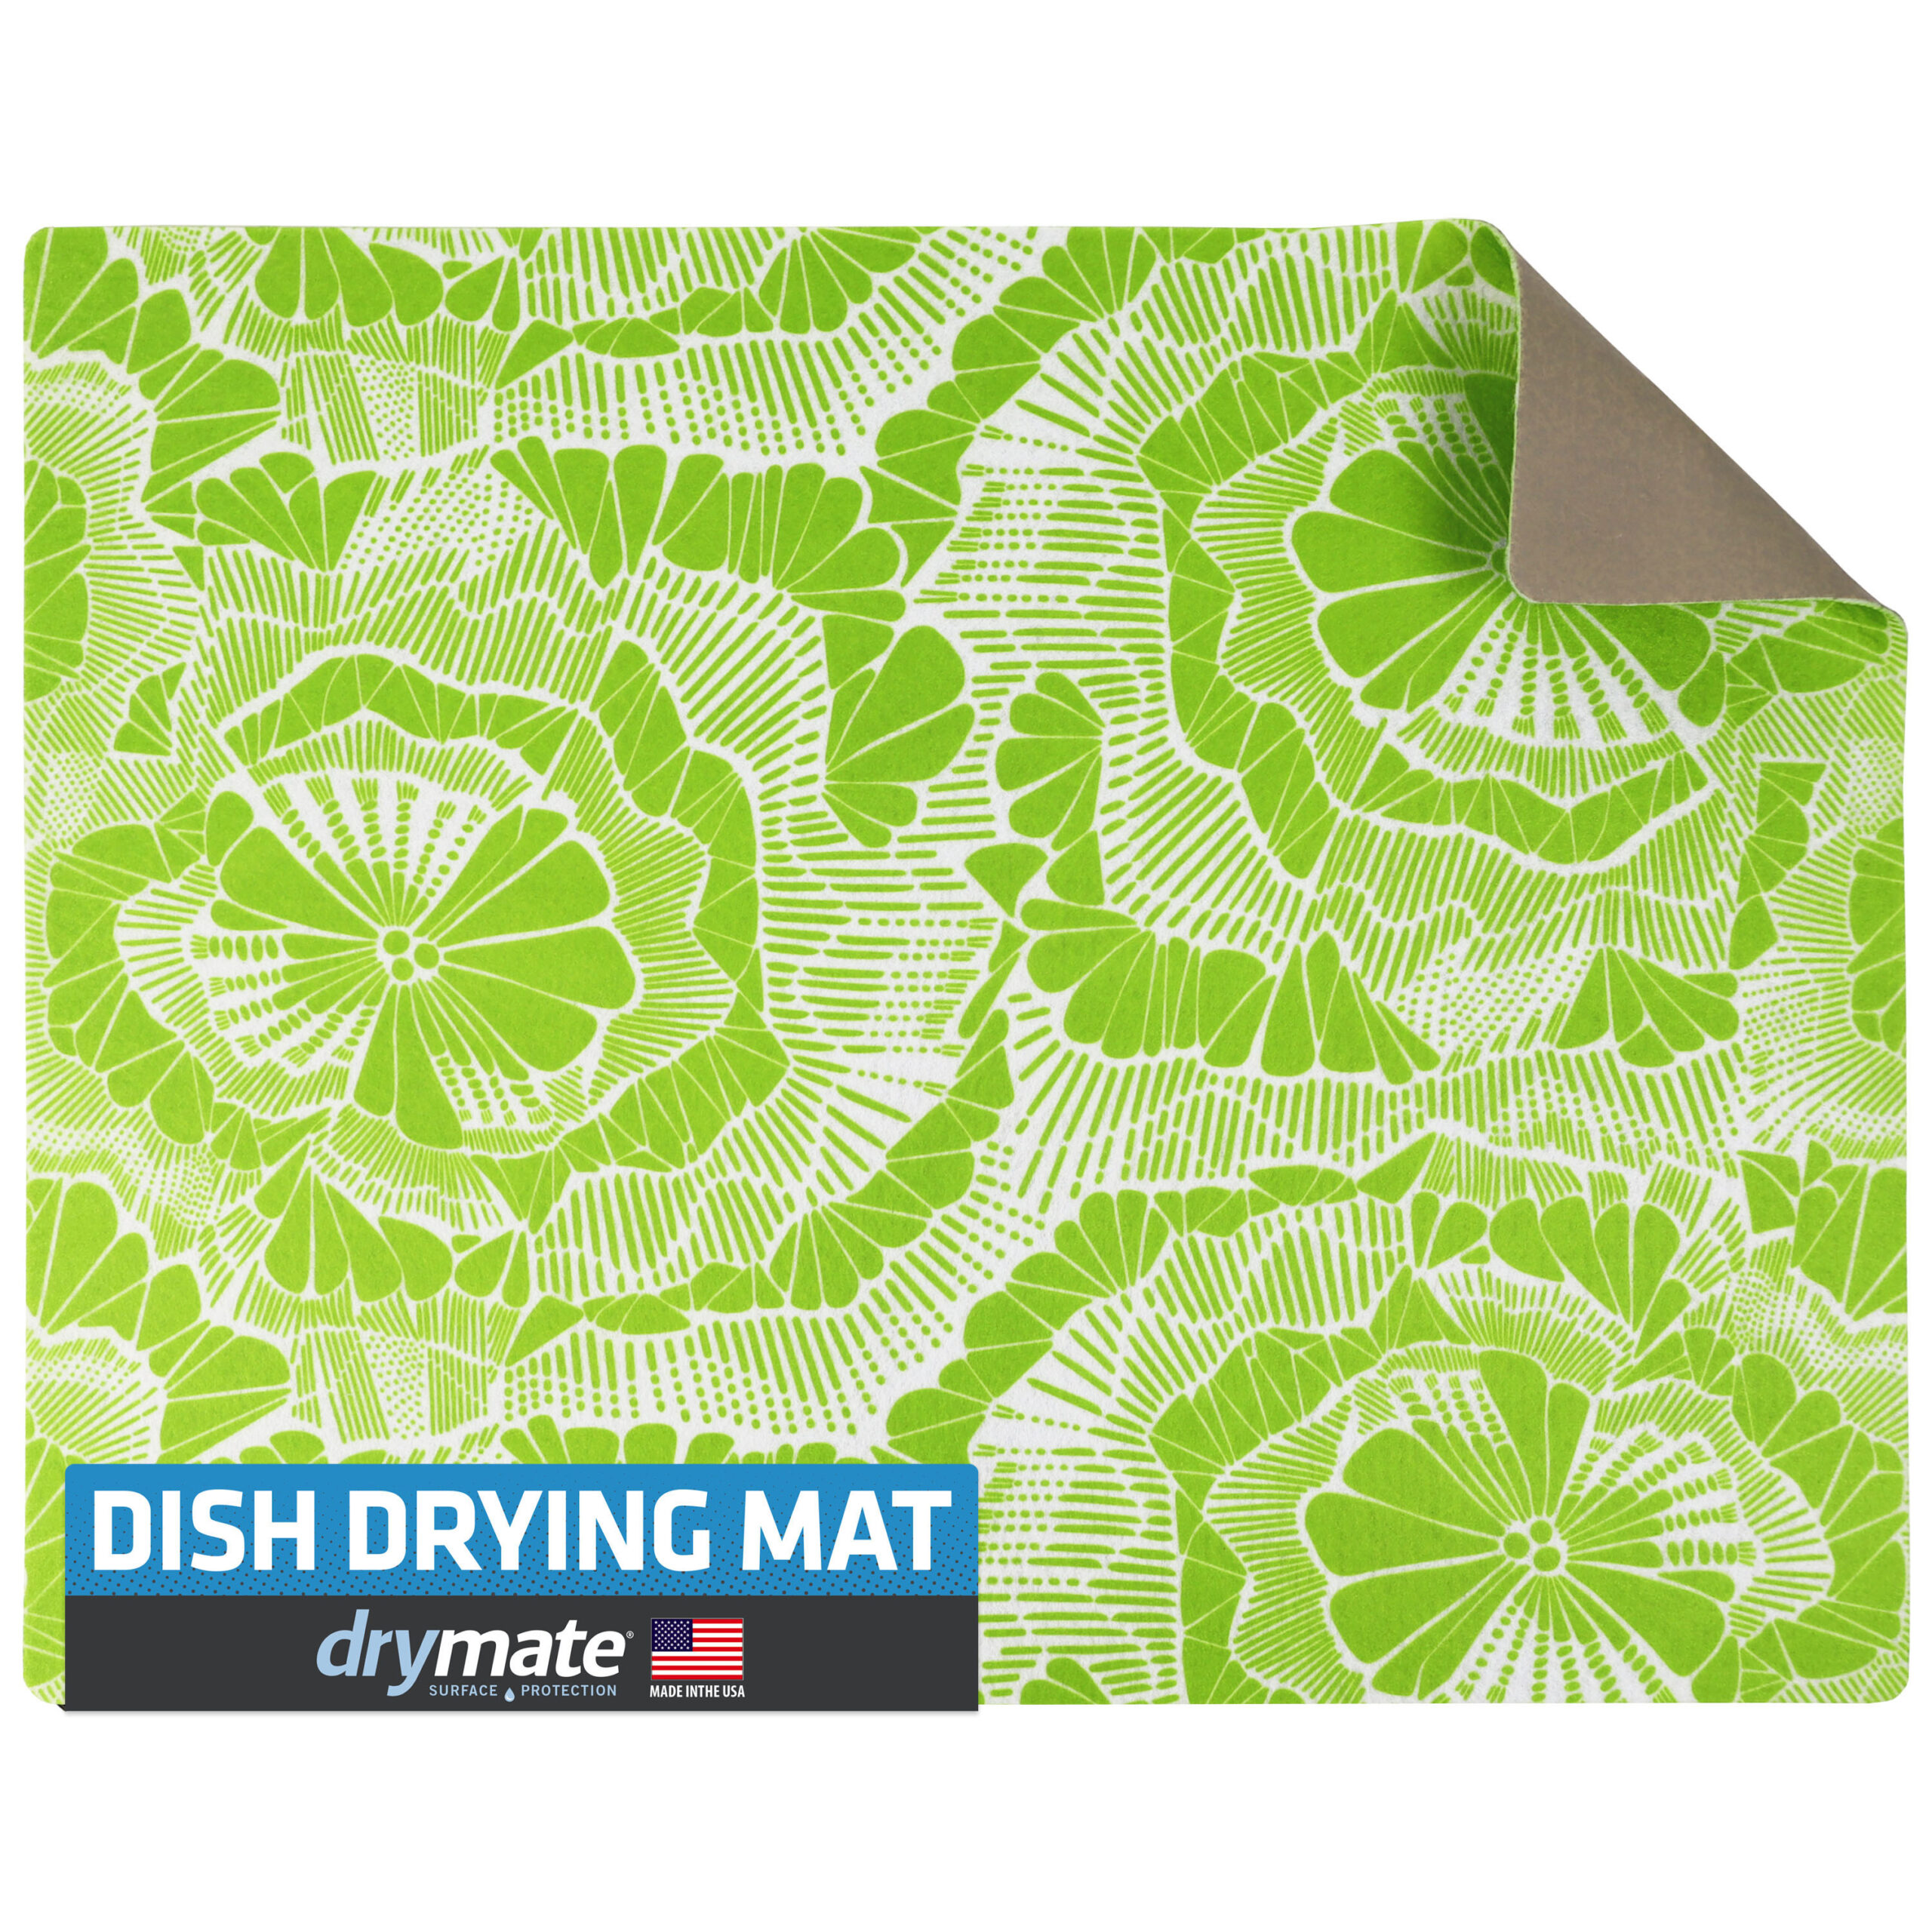 Drymate Dish Drying Mat Premium XL (19 Inches x 24 inches) Kitchen Dish Drying Pad - Absorbent/Waterproof - Machine Washable (Made in The Usa) (White)